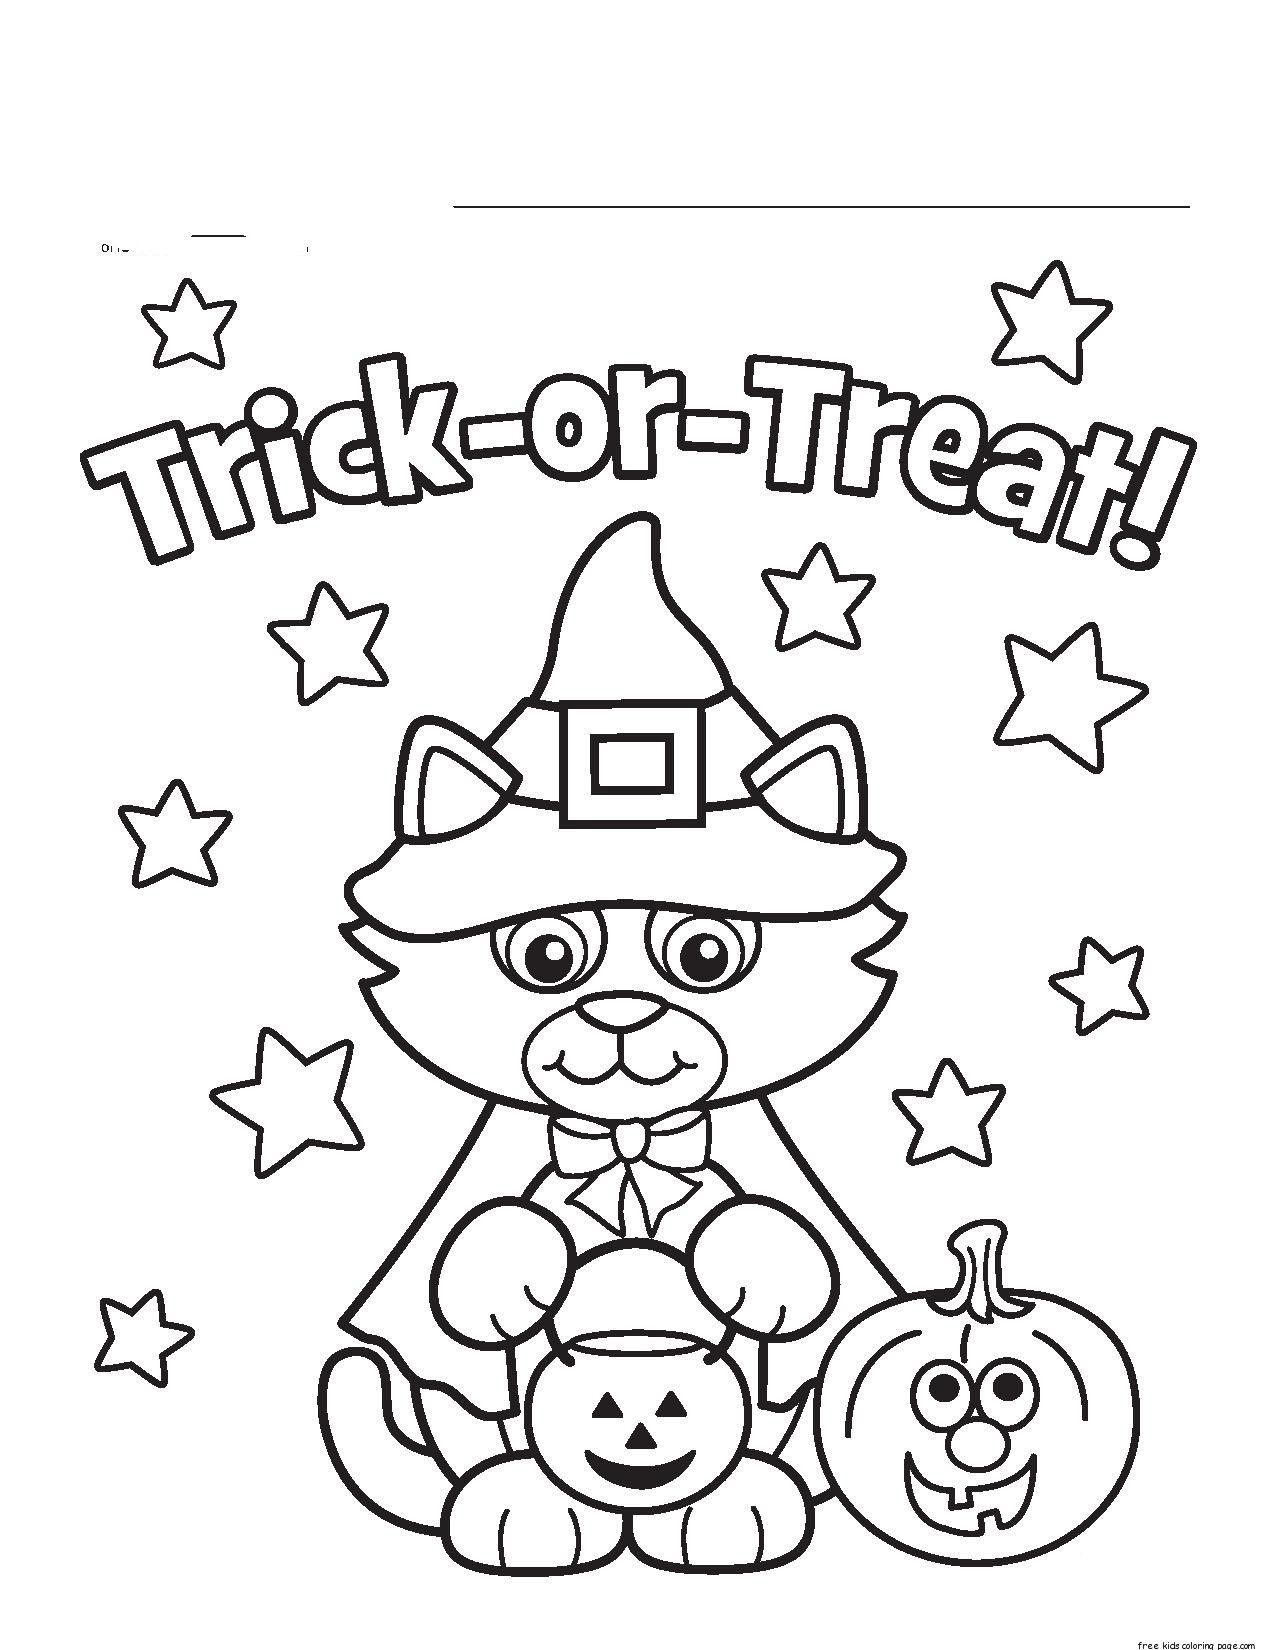 Free Printable Halloween Coloring Pages Kids, Halloween, The - Free Printable Halloween Coloring Pages